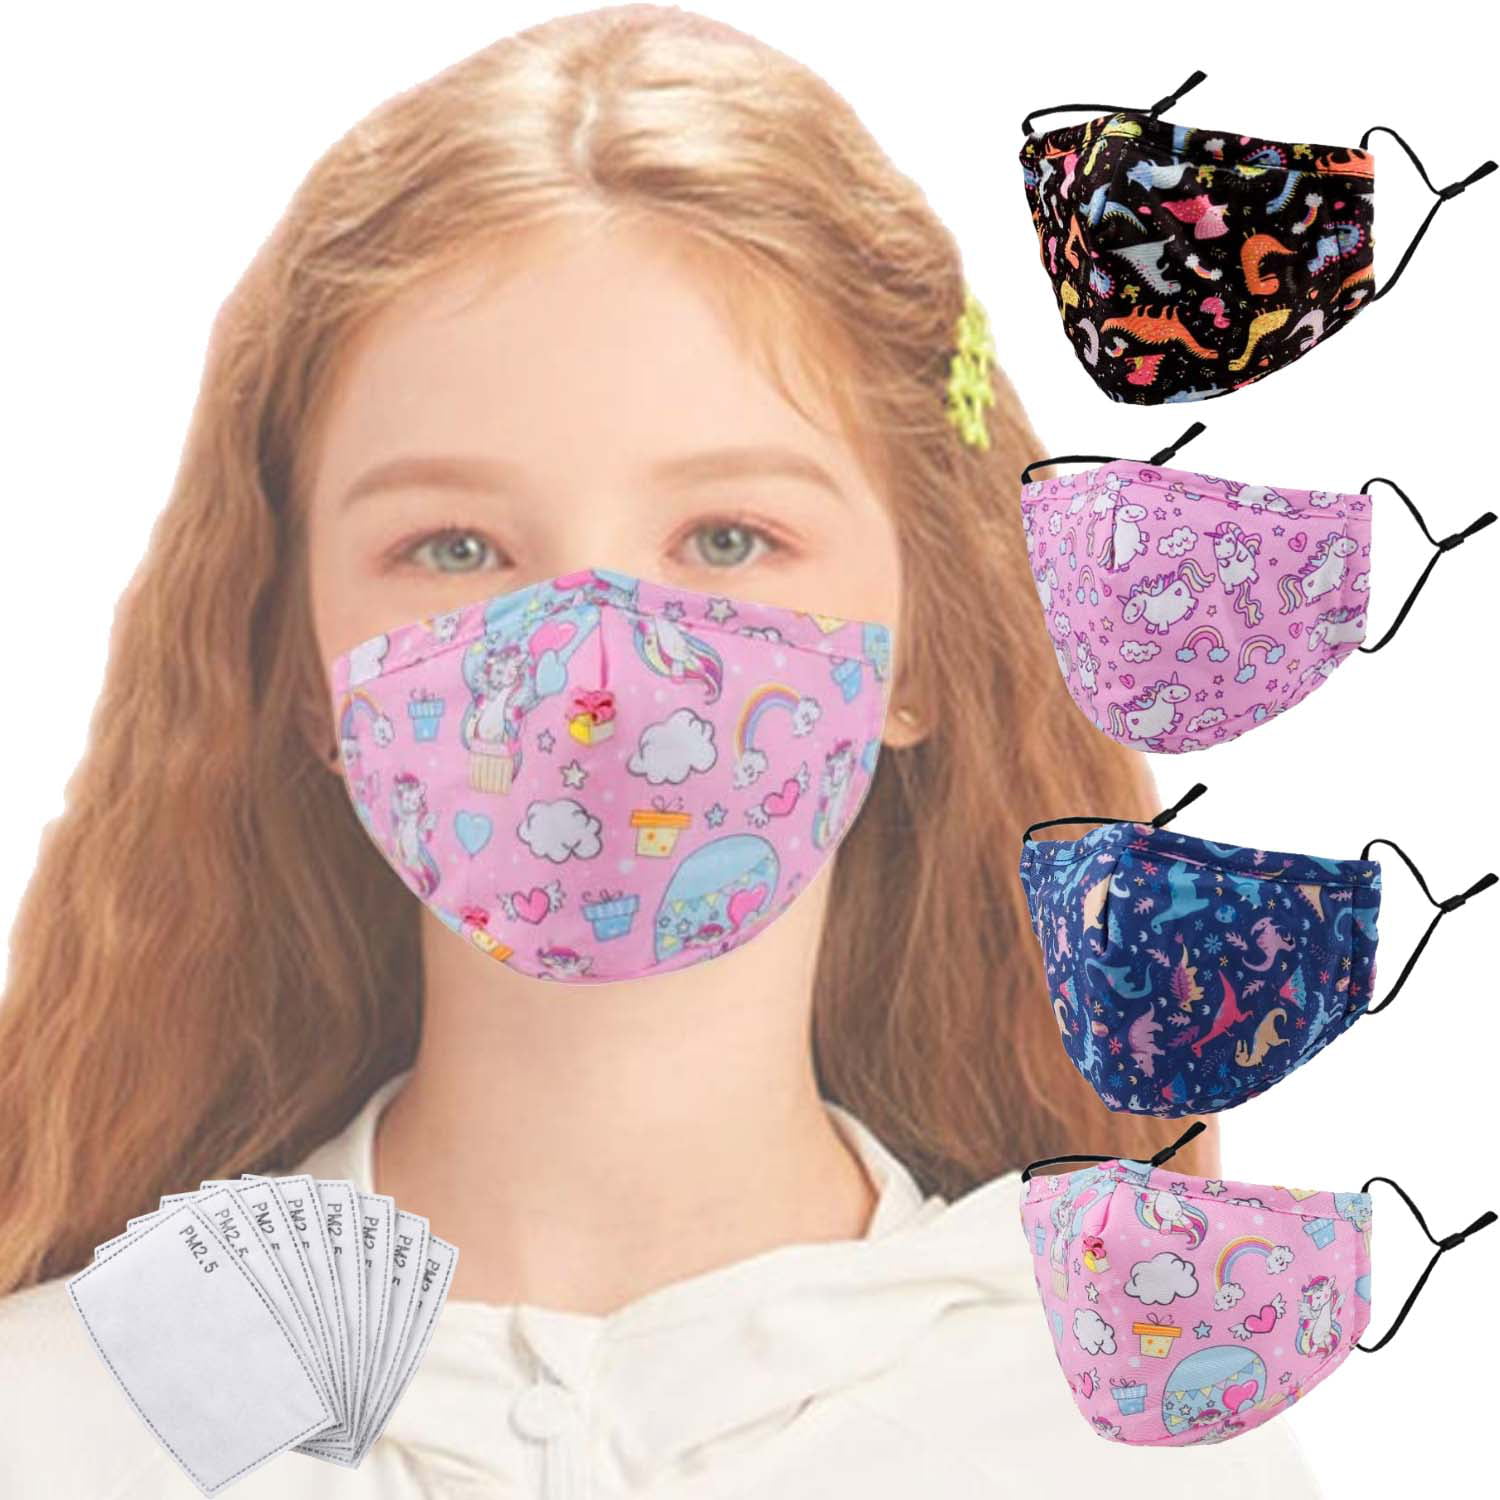 Cotton Face Covering for Dust Protection,Washable Reusable Fist Print Earloop Facial Covering for Daily Use 